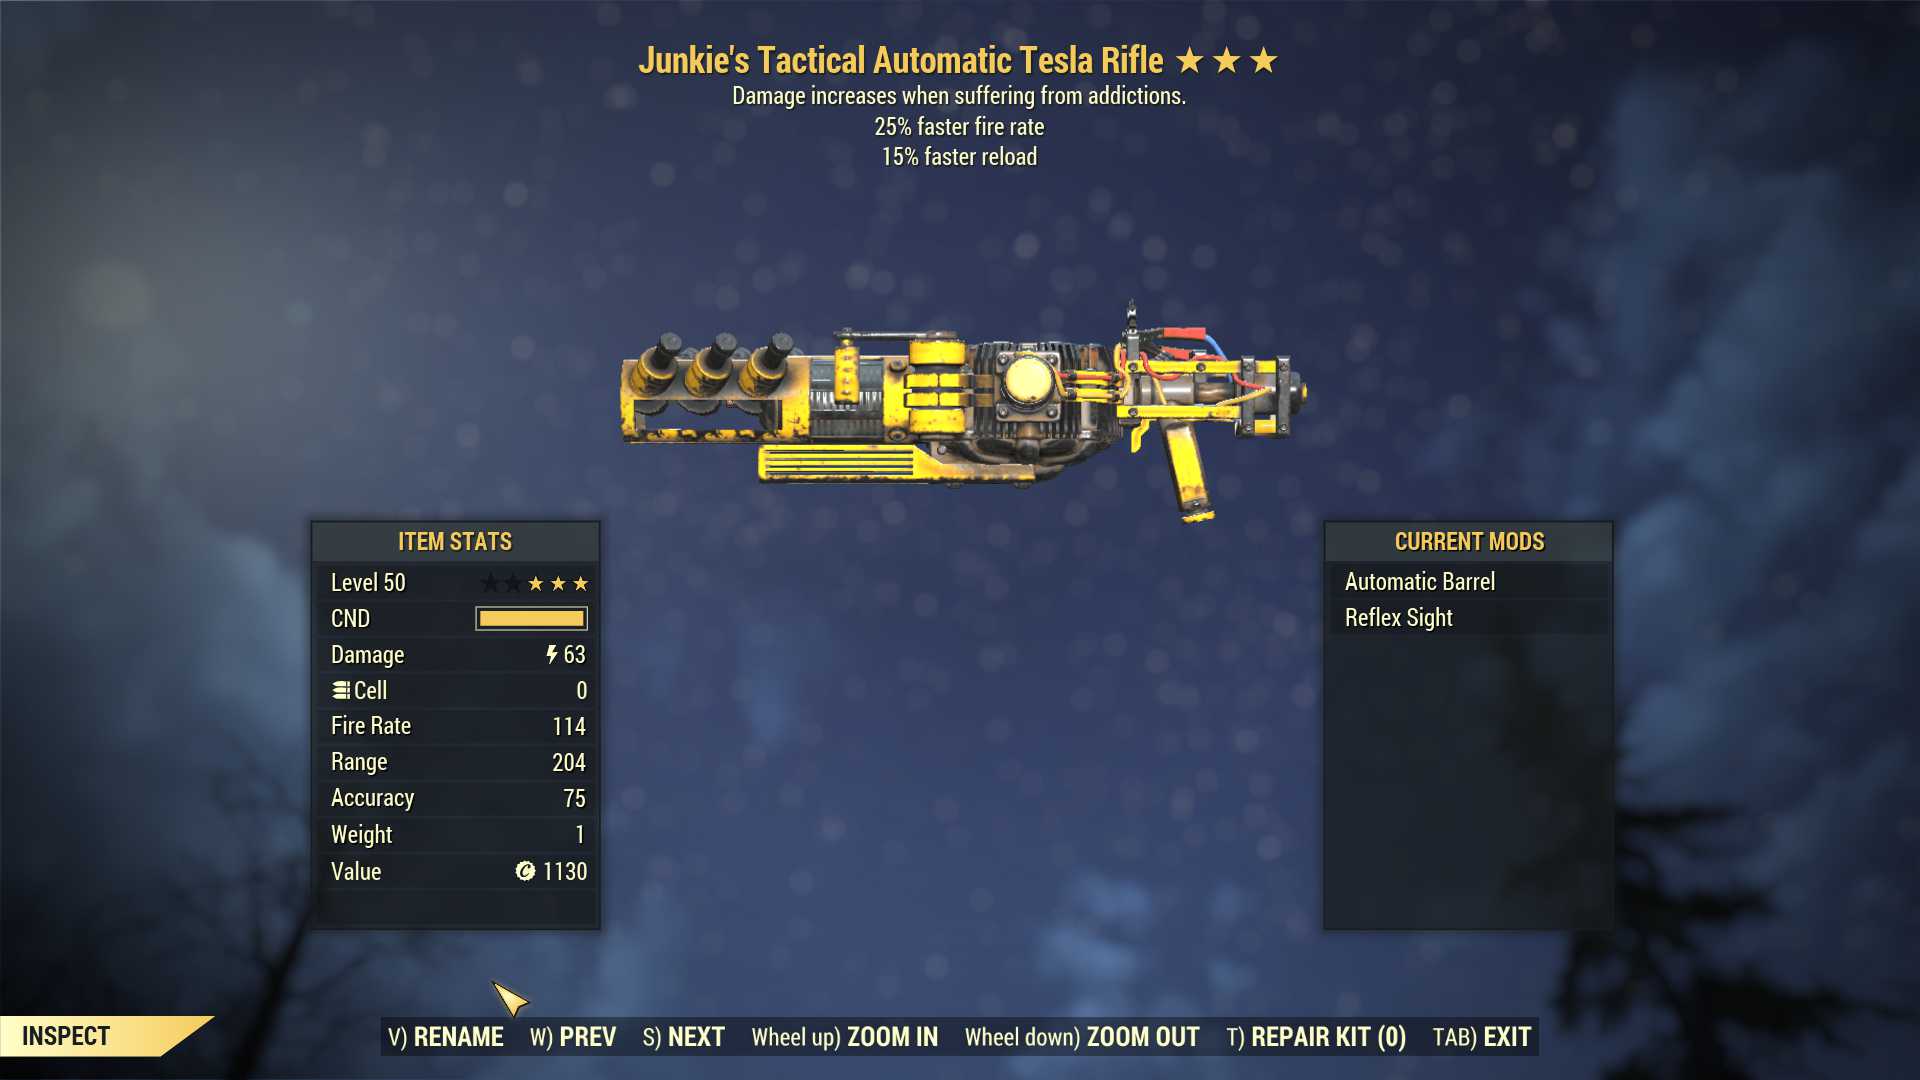 Junkie's Tesla rifle (25% faster fire rate, 15% faster reload)